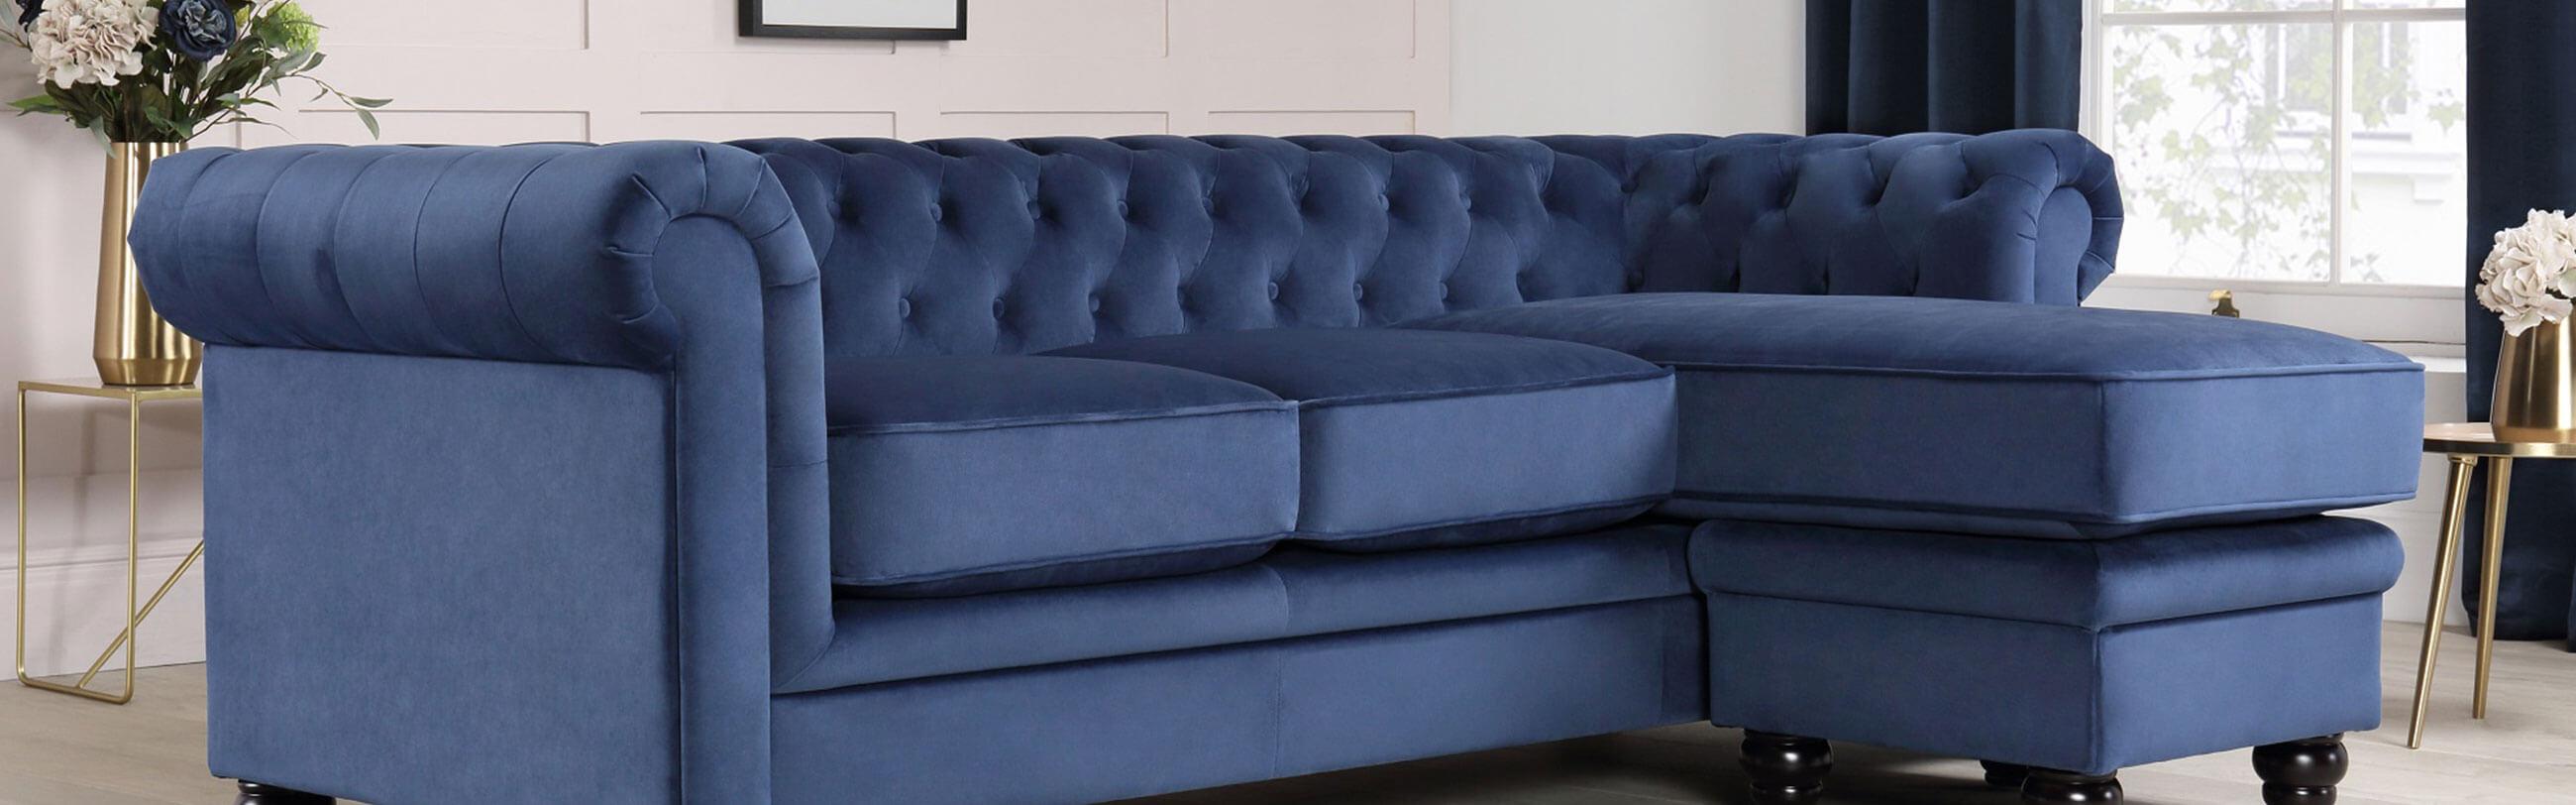 8 Ways To Style The Chesterfield Sofa, Are Chesterfield Sofas Out Of Style